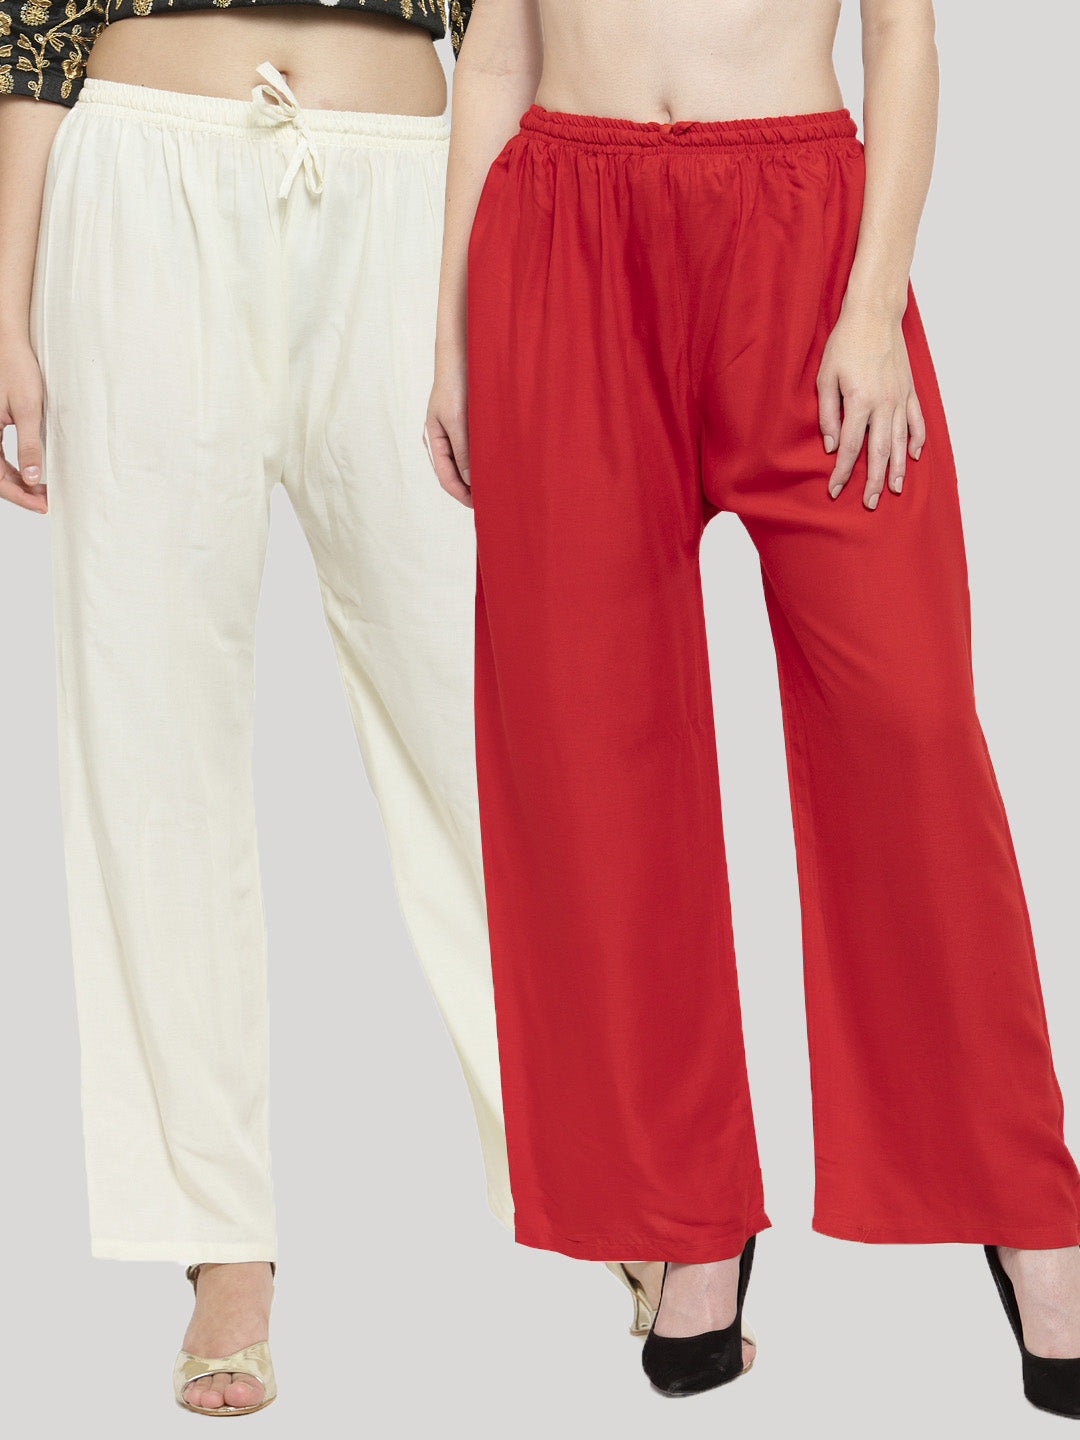 Women's Solid Off-White & Red Rayon Palazzo (Pack Of 2) - Wahe-NOOR